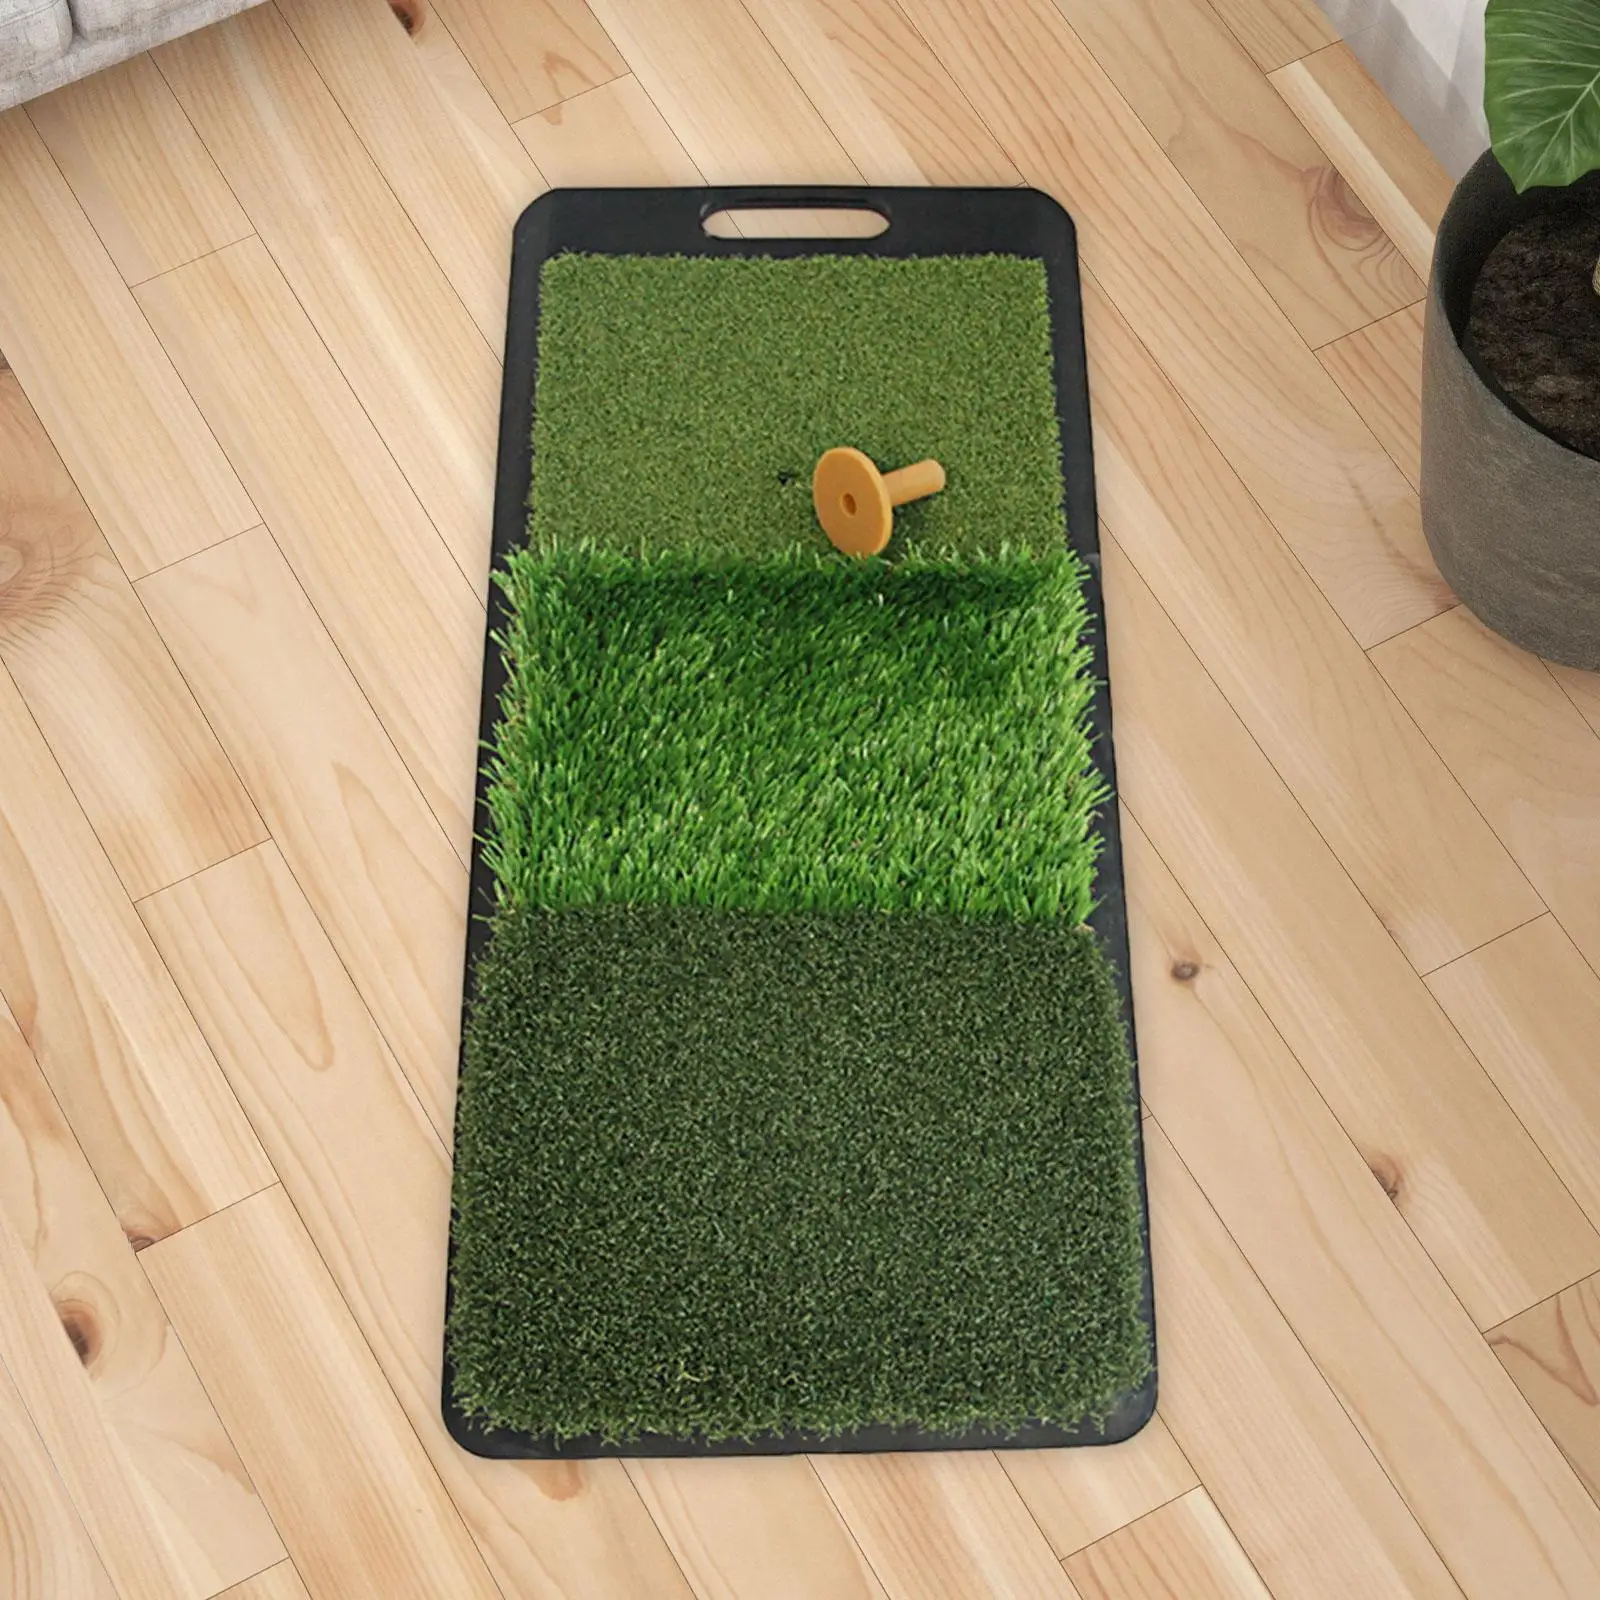 Golf Game Mat Indoor Outdoor Game Golf Hitting Mat Artificial Grass Golf Training Aid for Adults and Family for Backyard